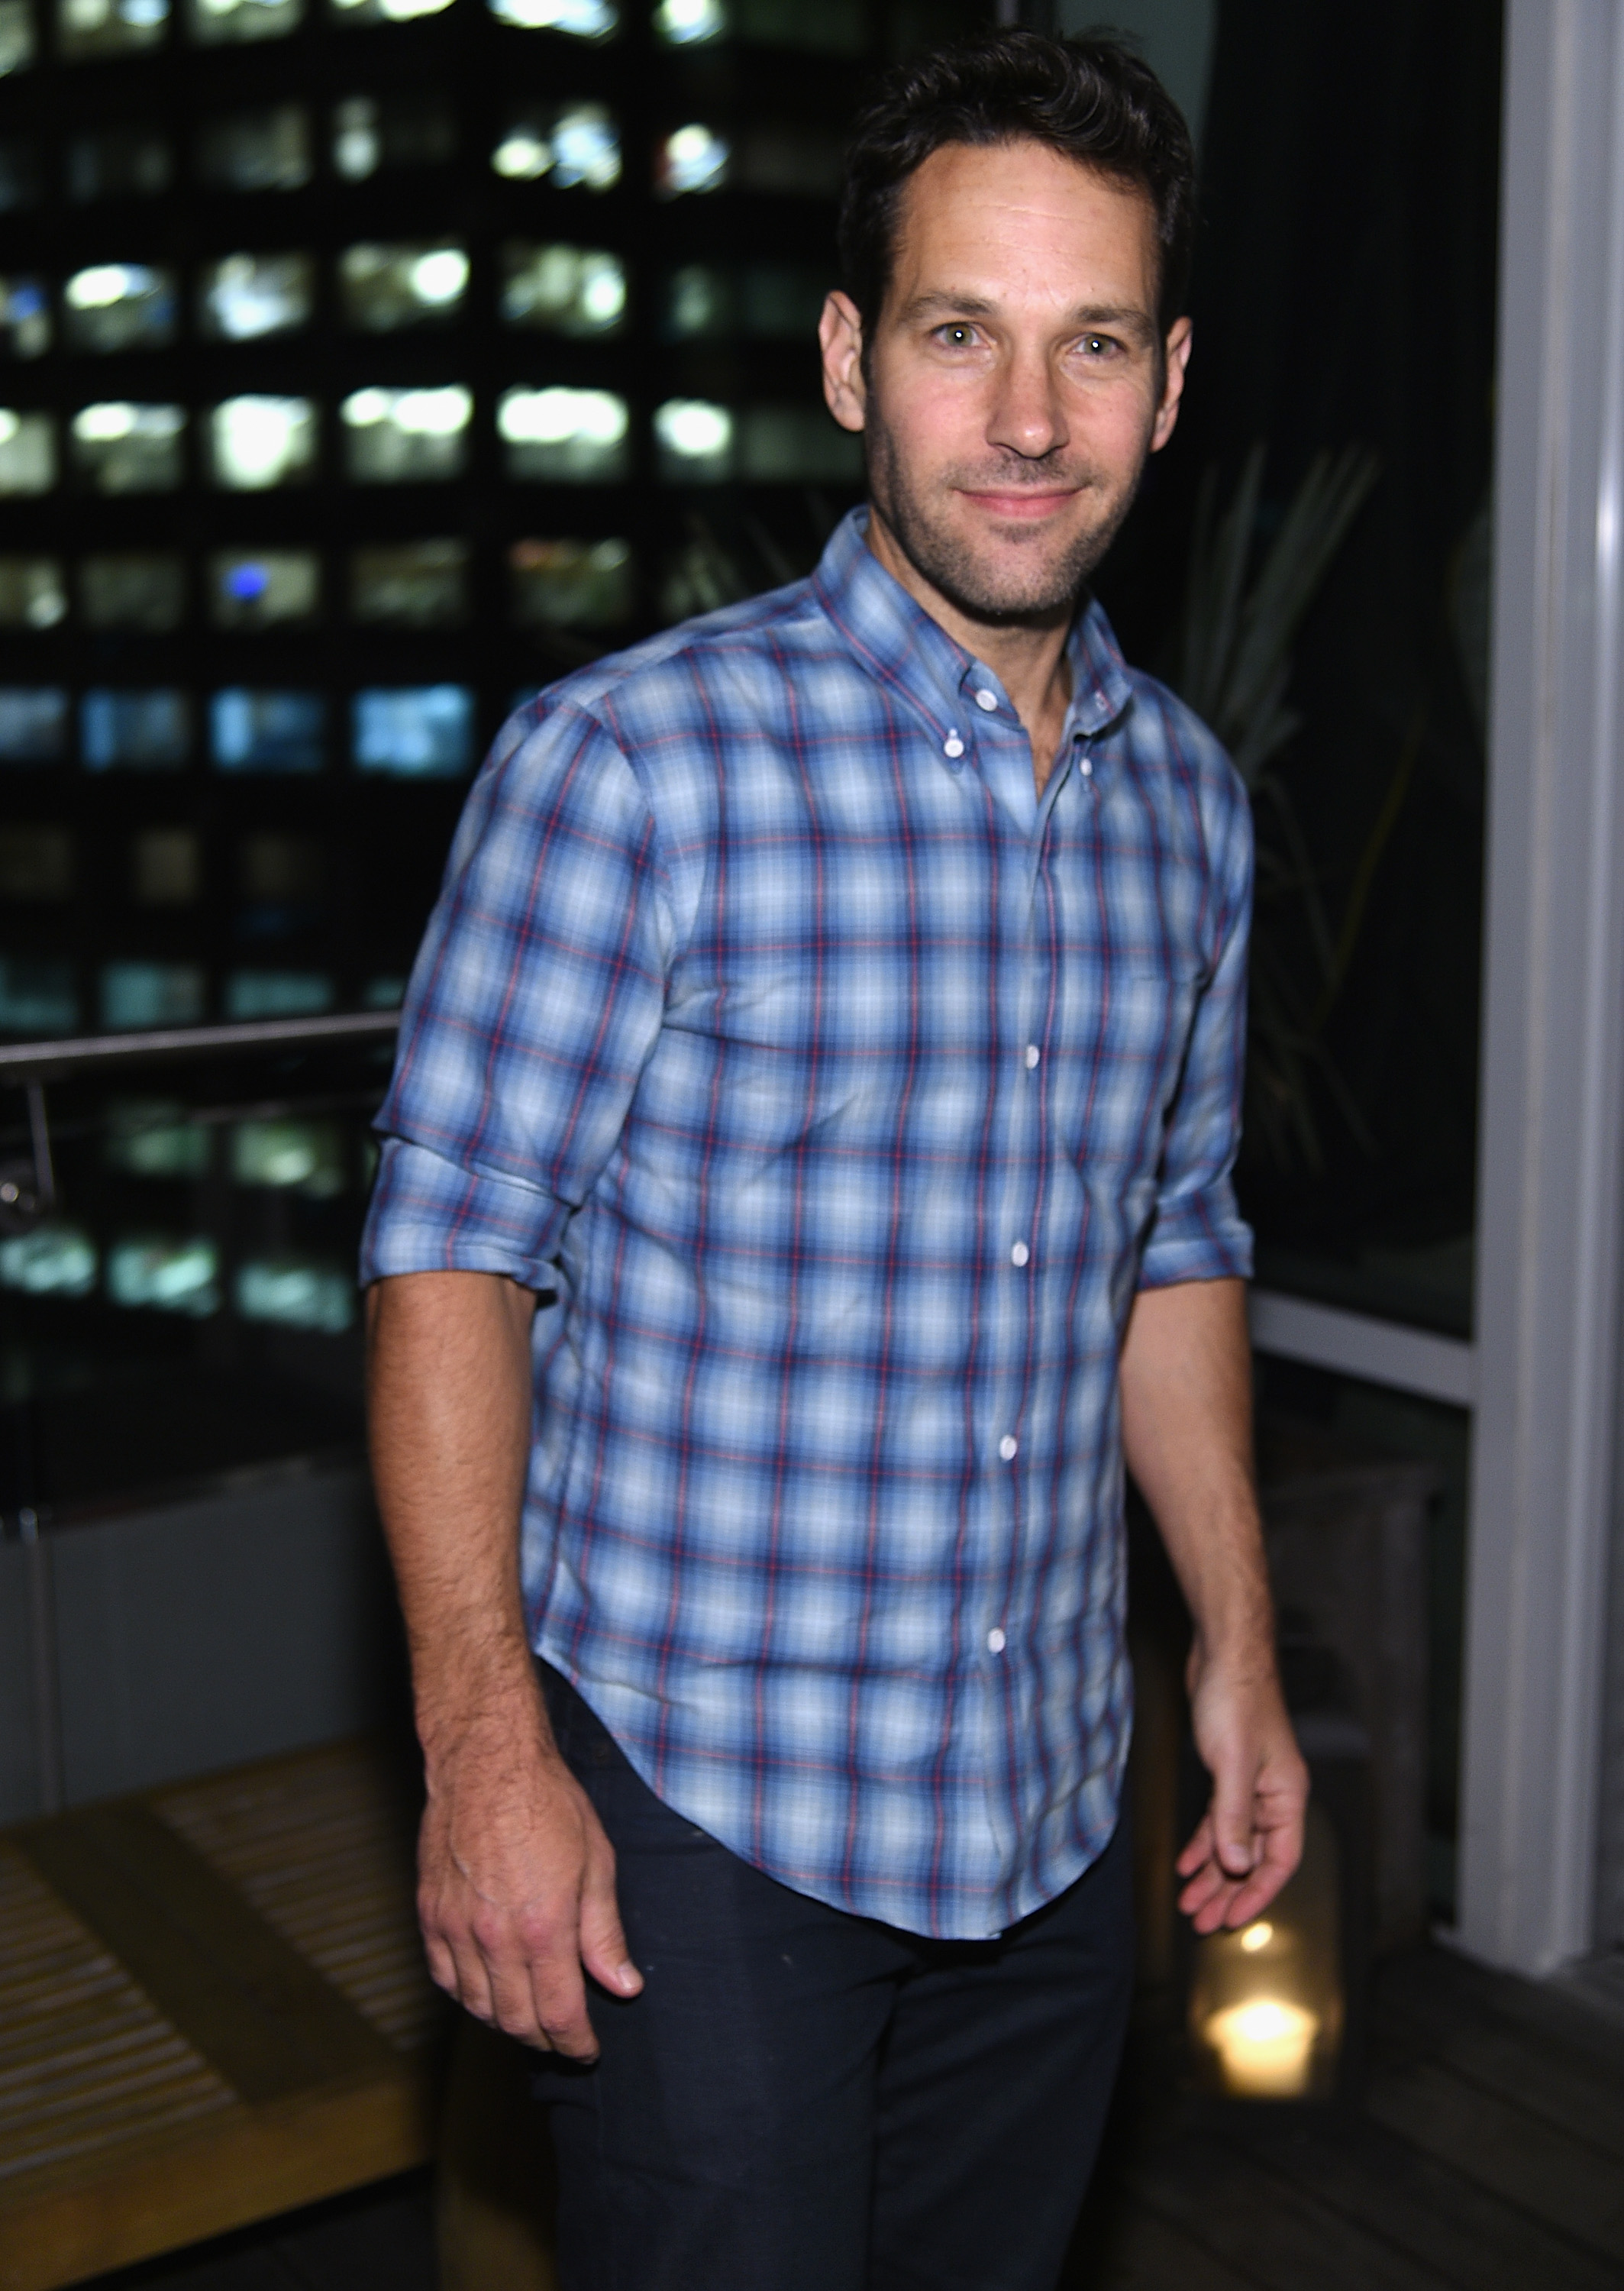 Paul Rudd at Marvel's "Guardians of the Galaxy" screening after party in New York City on Jul. 29, 2014.